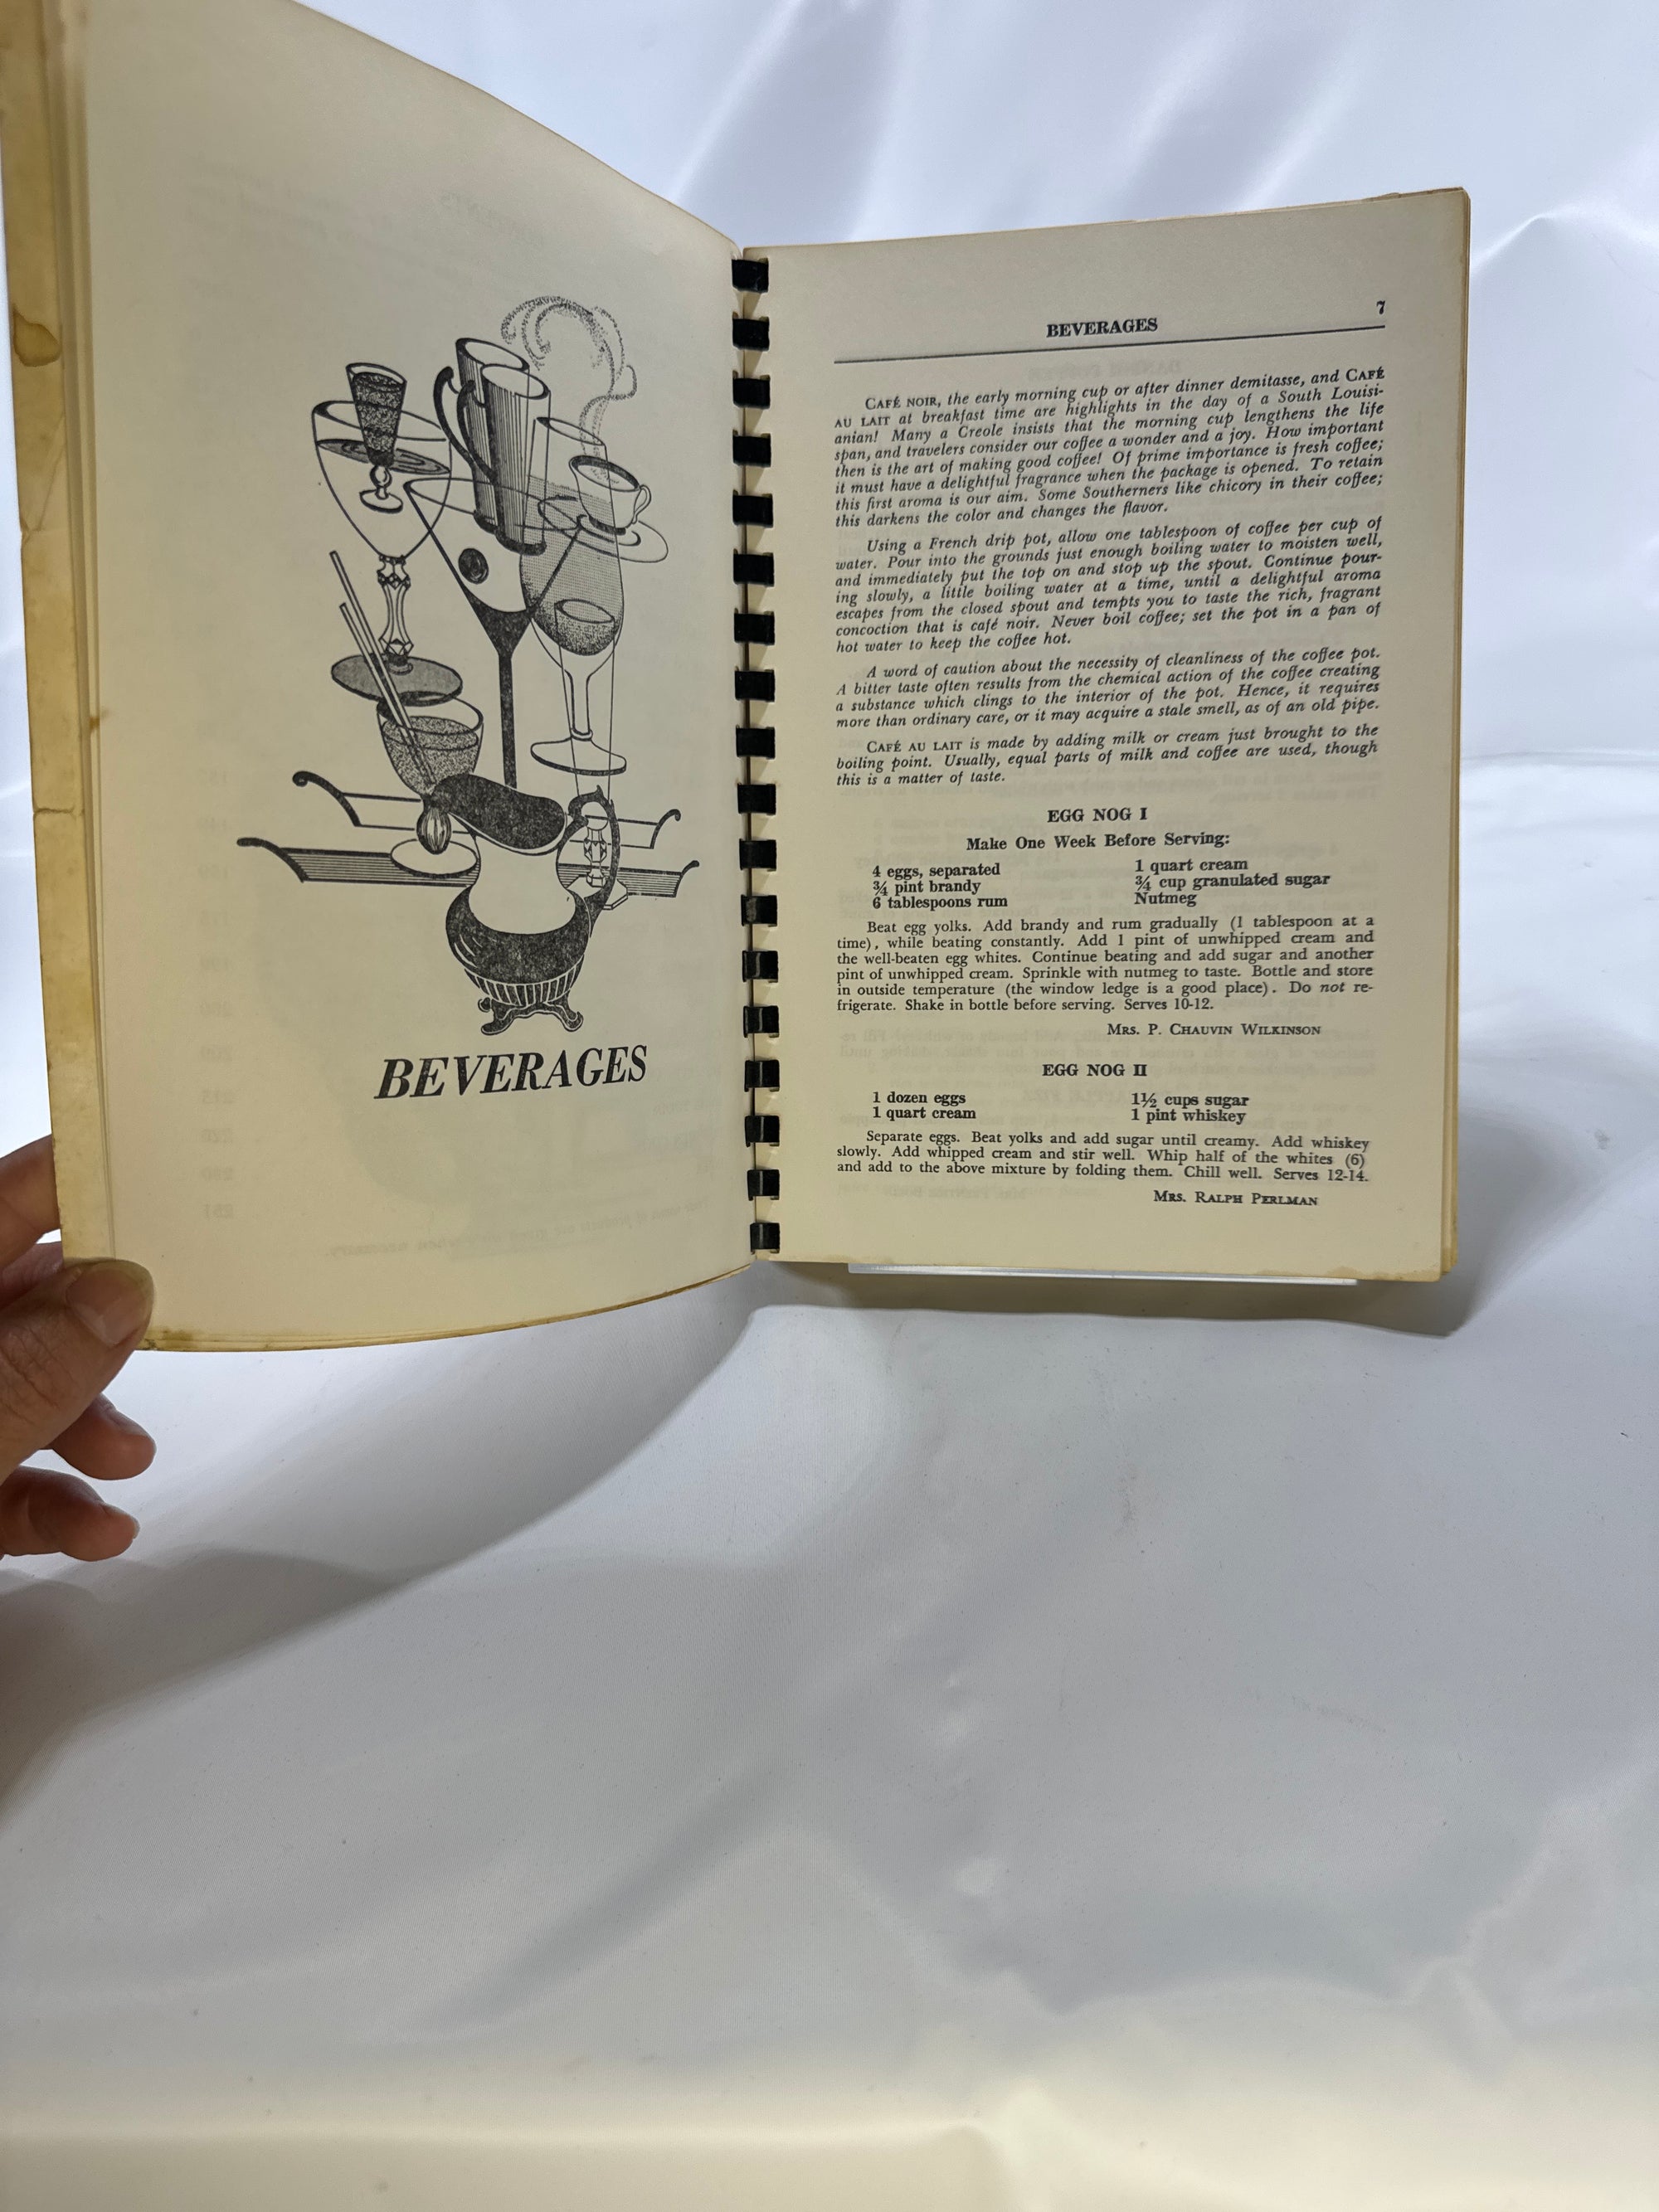 River Road Recipes Published by the Junior League of Baton Rouge Inc 1965 Vintage Book